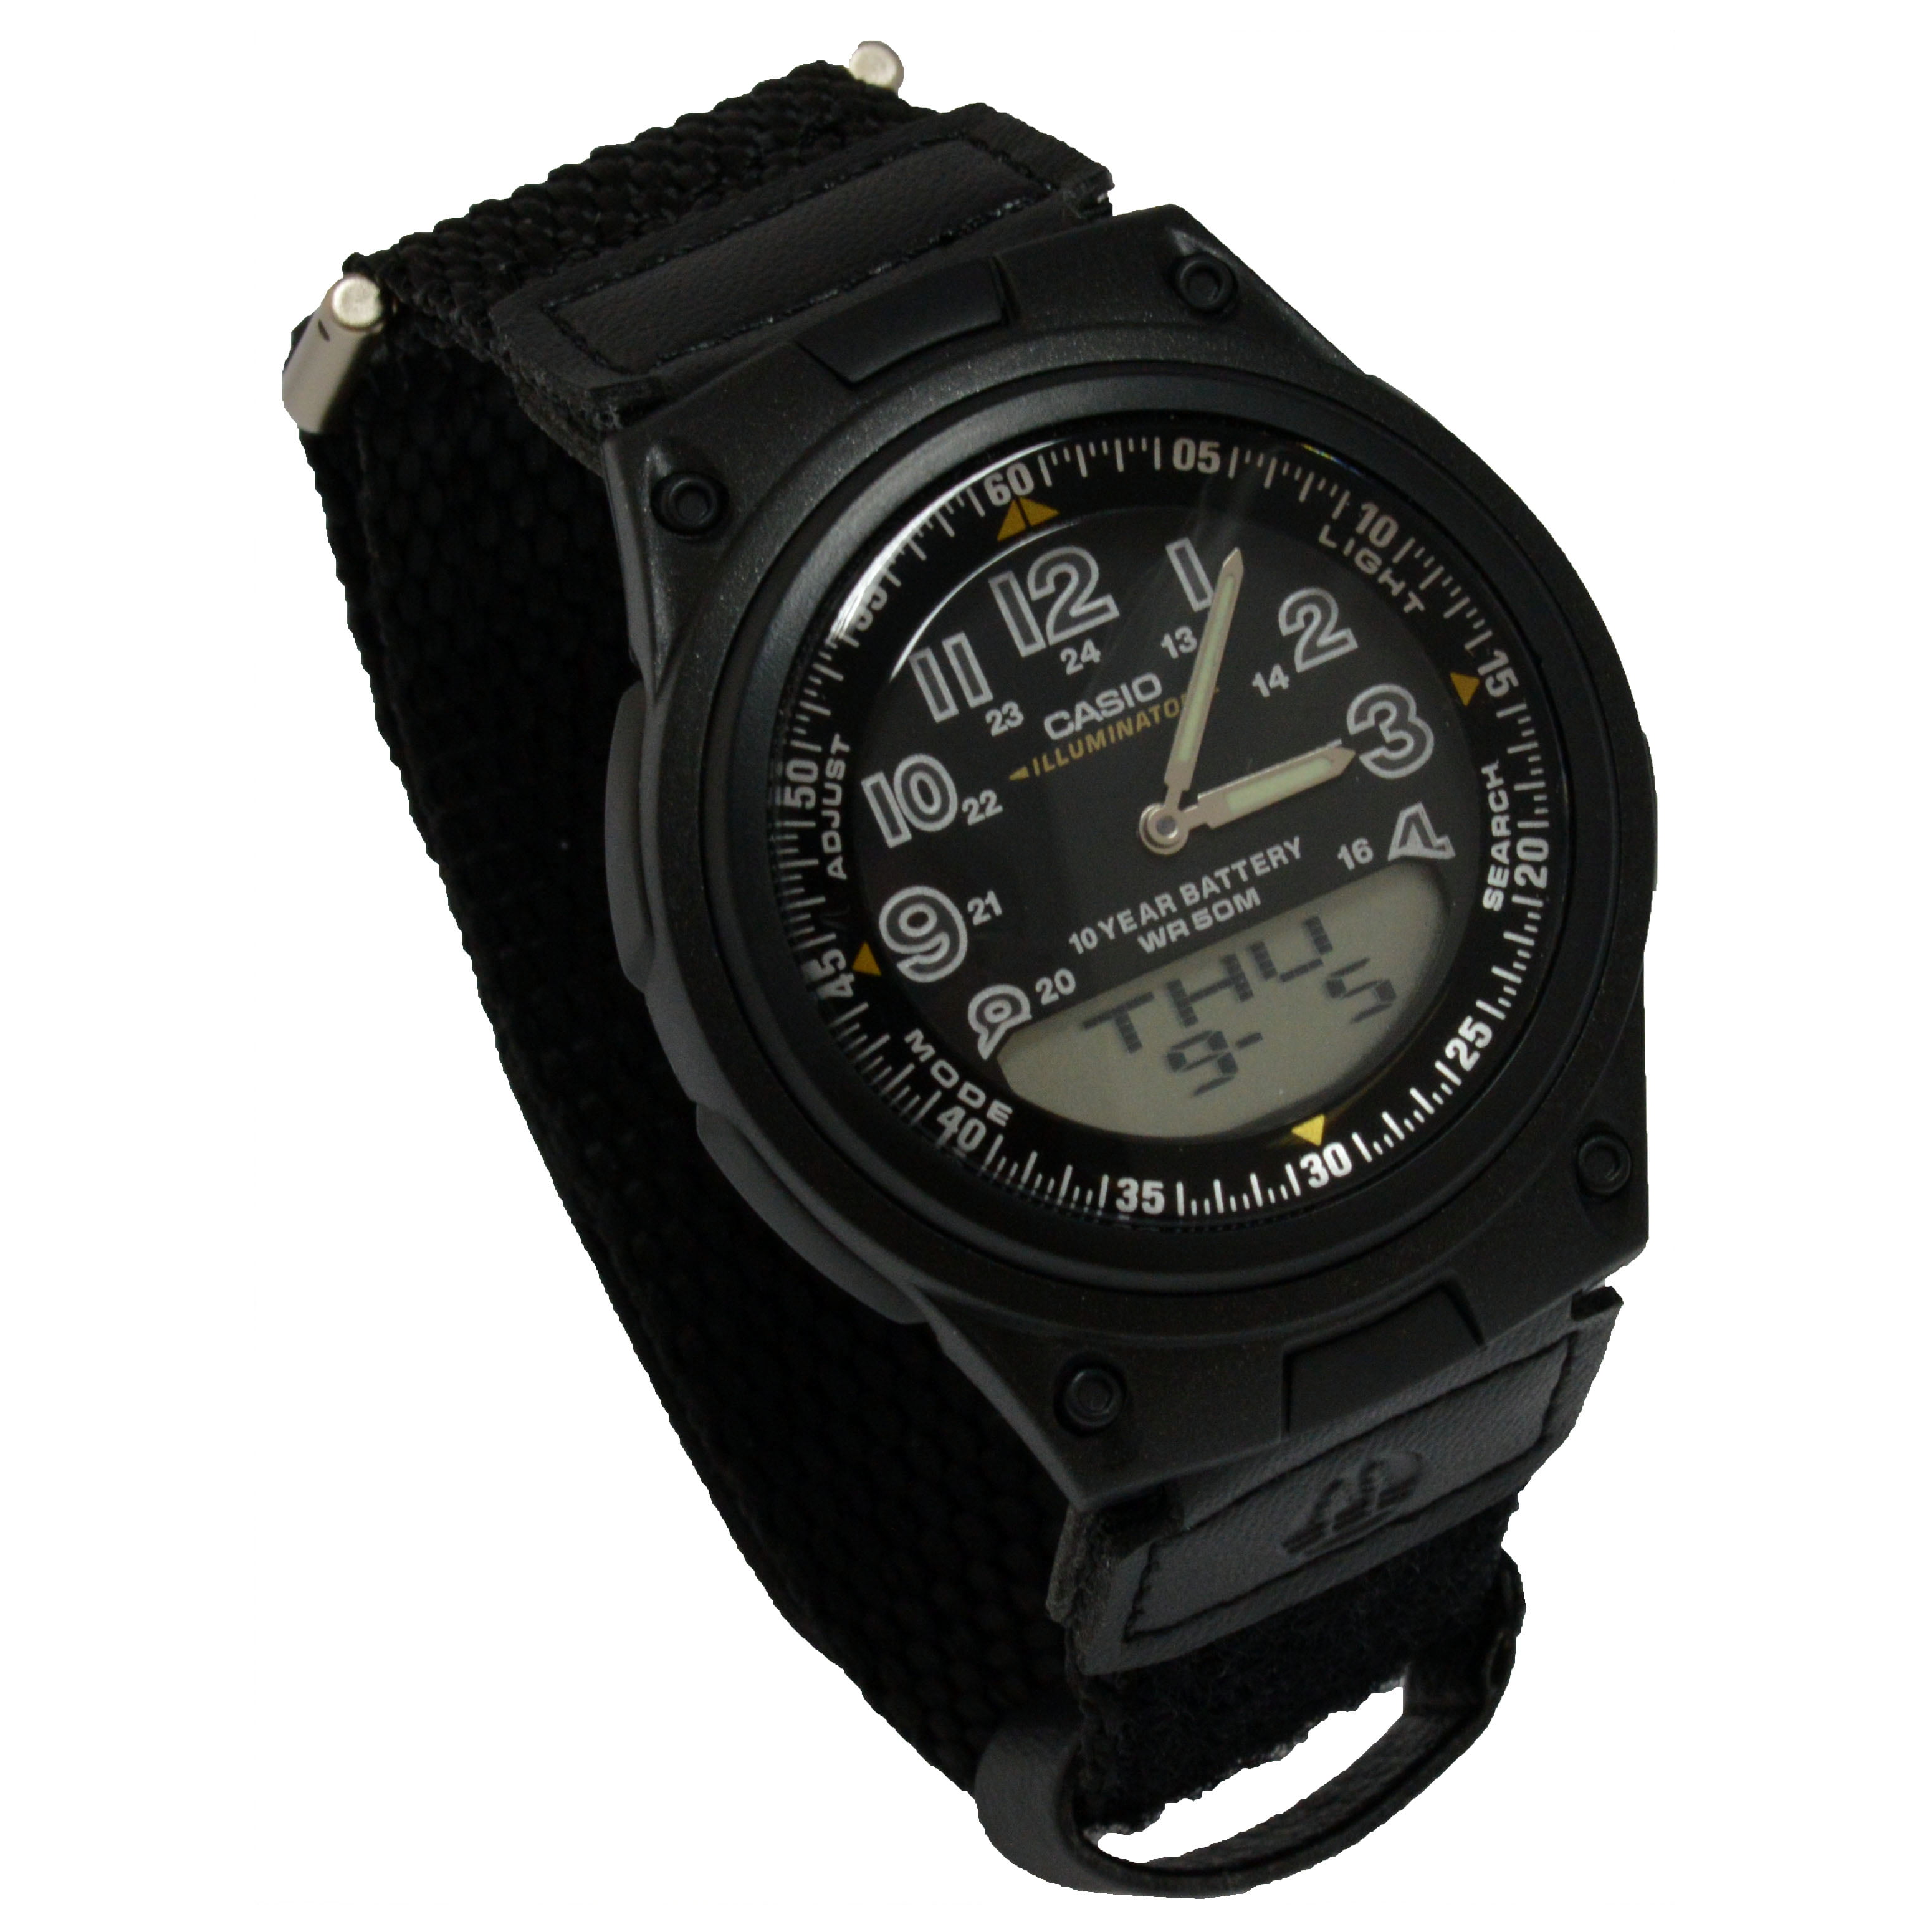 casio watch used by taliban as timer